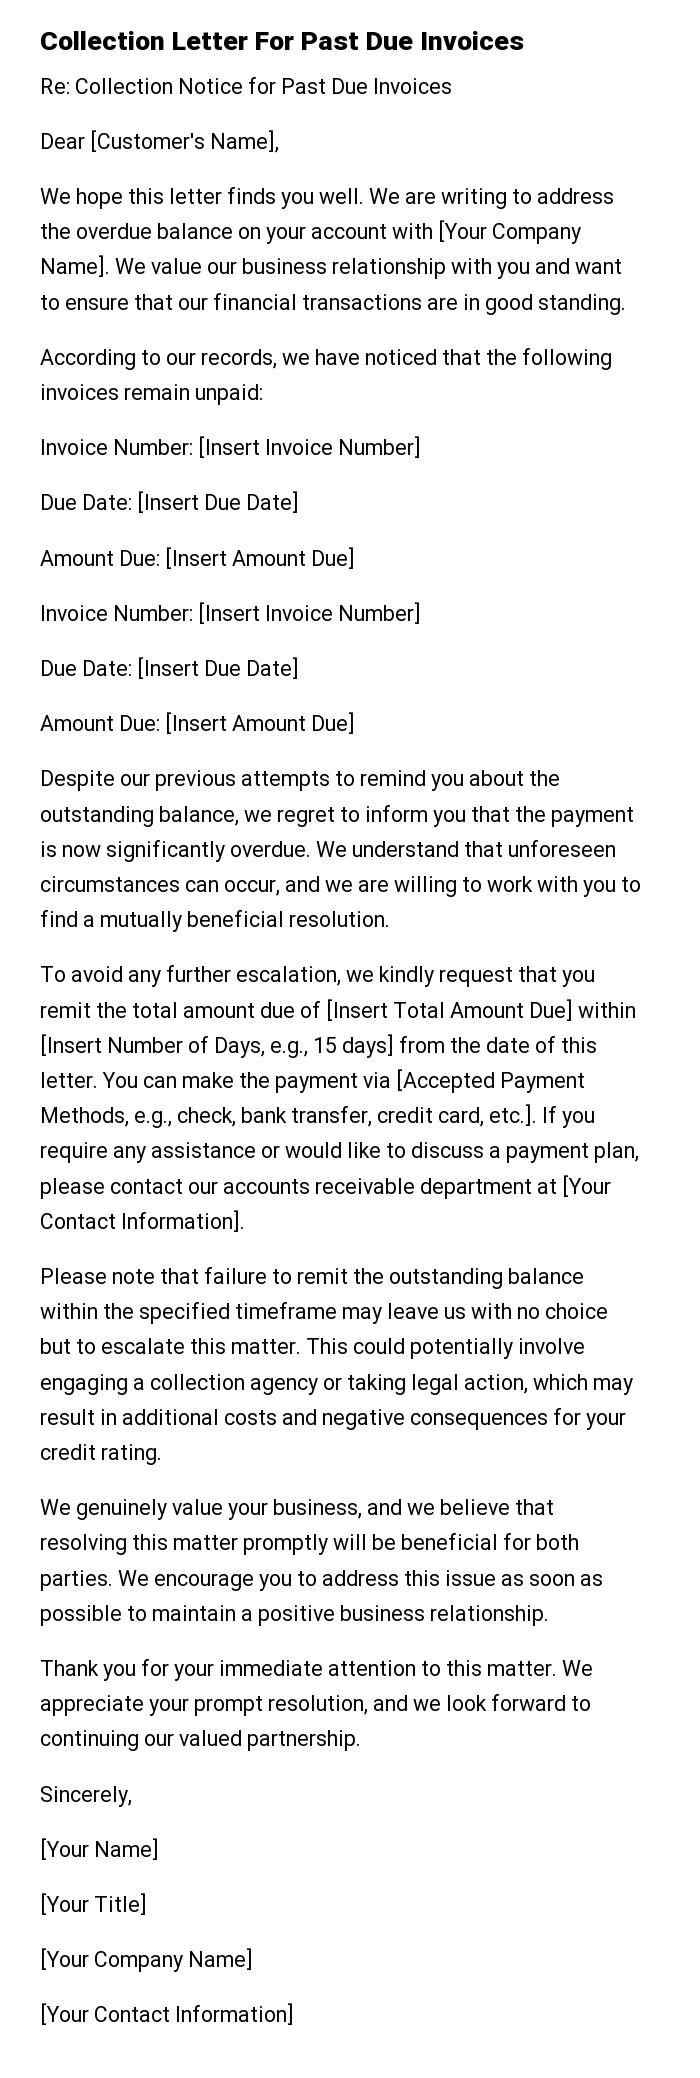 Collection Letter For Past Due Invoices